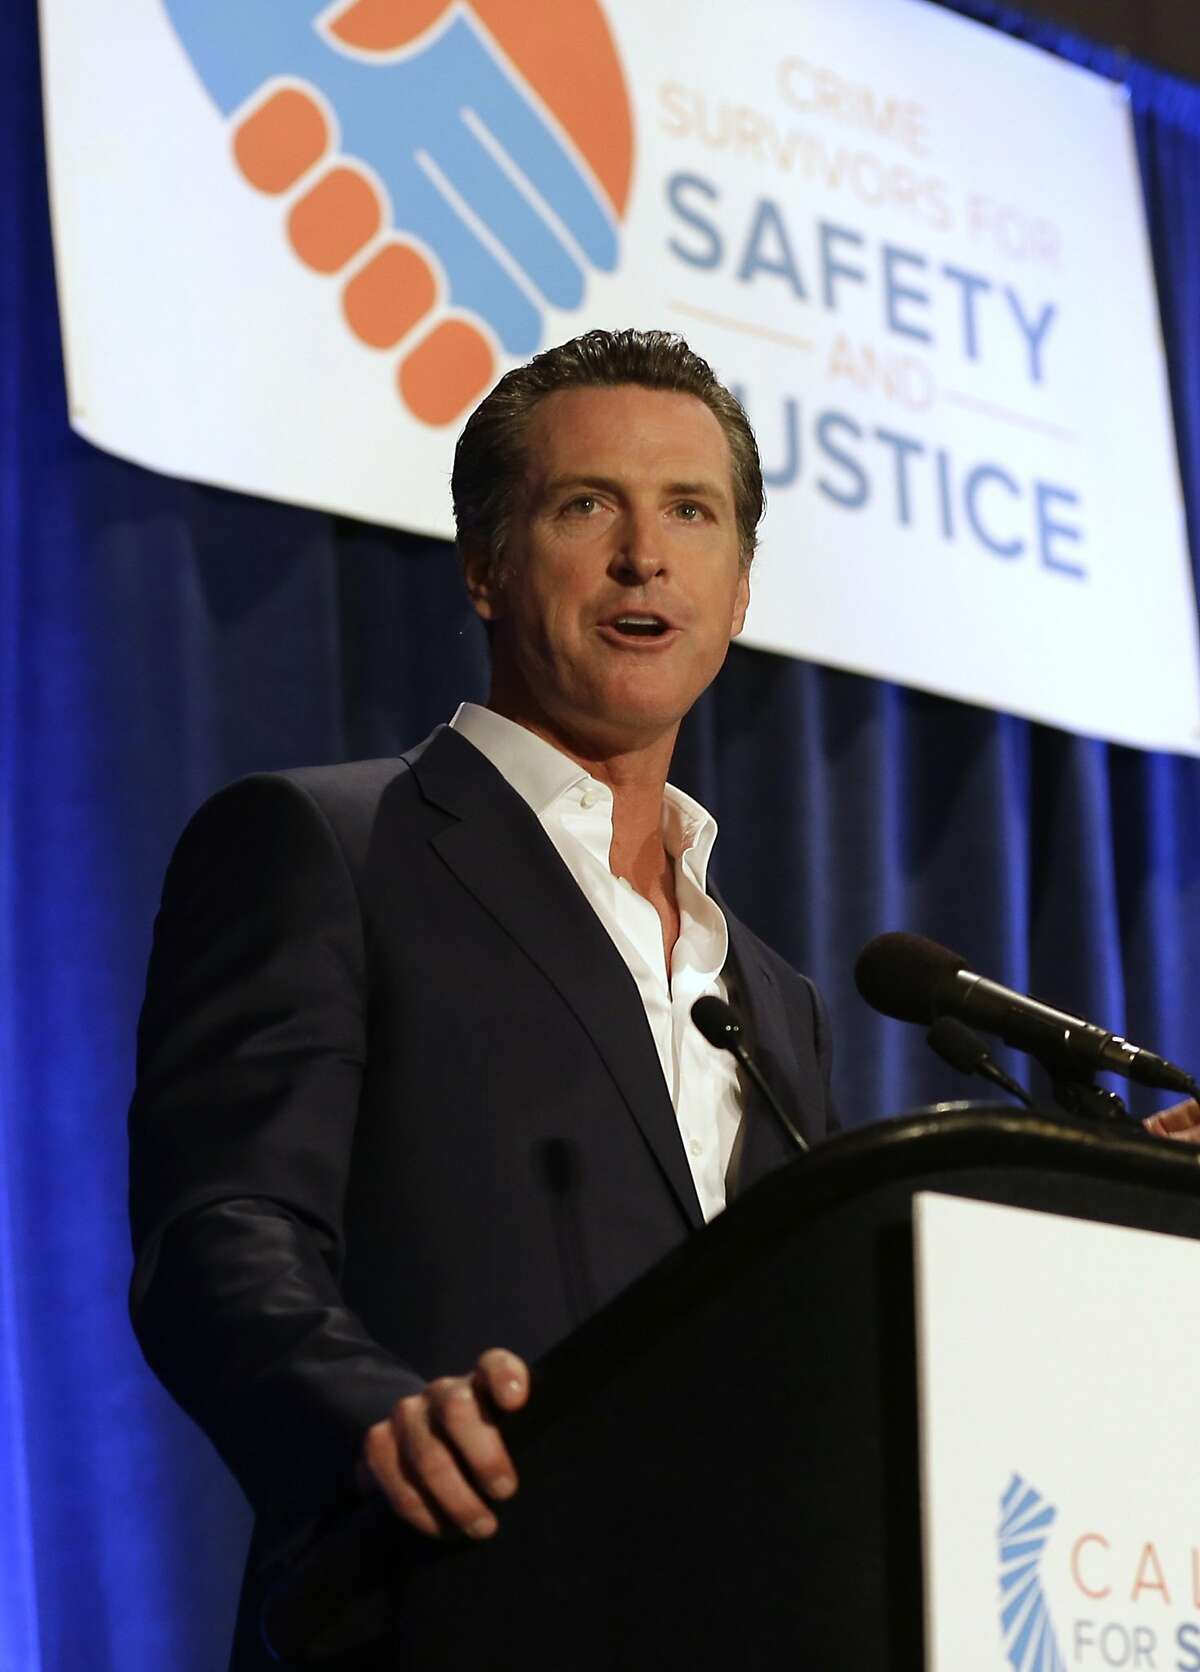 In this photo taken Monday, April 20, 2015, Lt. Gavin Newsom speaks at the Californians for Safety and Justice conference in Sacramento, Calif. Newsom and former state Sen. Sam Blakeslee, R-San Luis Obispo, have teamed up with computer scientists at Cal Poly San Luis Obispo on a web-based video search engine that they hope will democratize government by using the latest in voice- and face-recognition software to allow people to see, hear and read what their representatives are doing in the state capital. (AP Photo/Rich Pedroncelli)